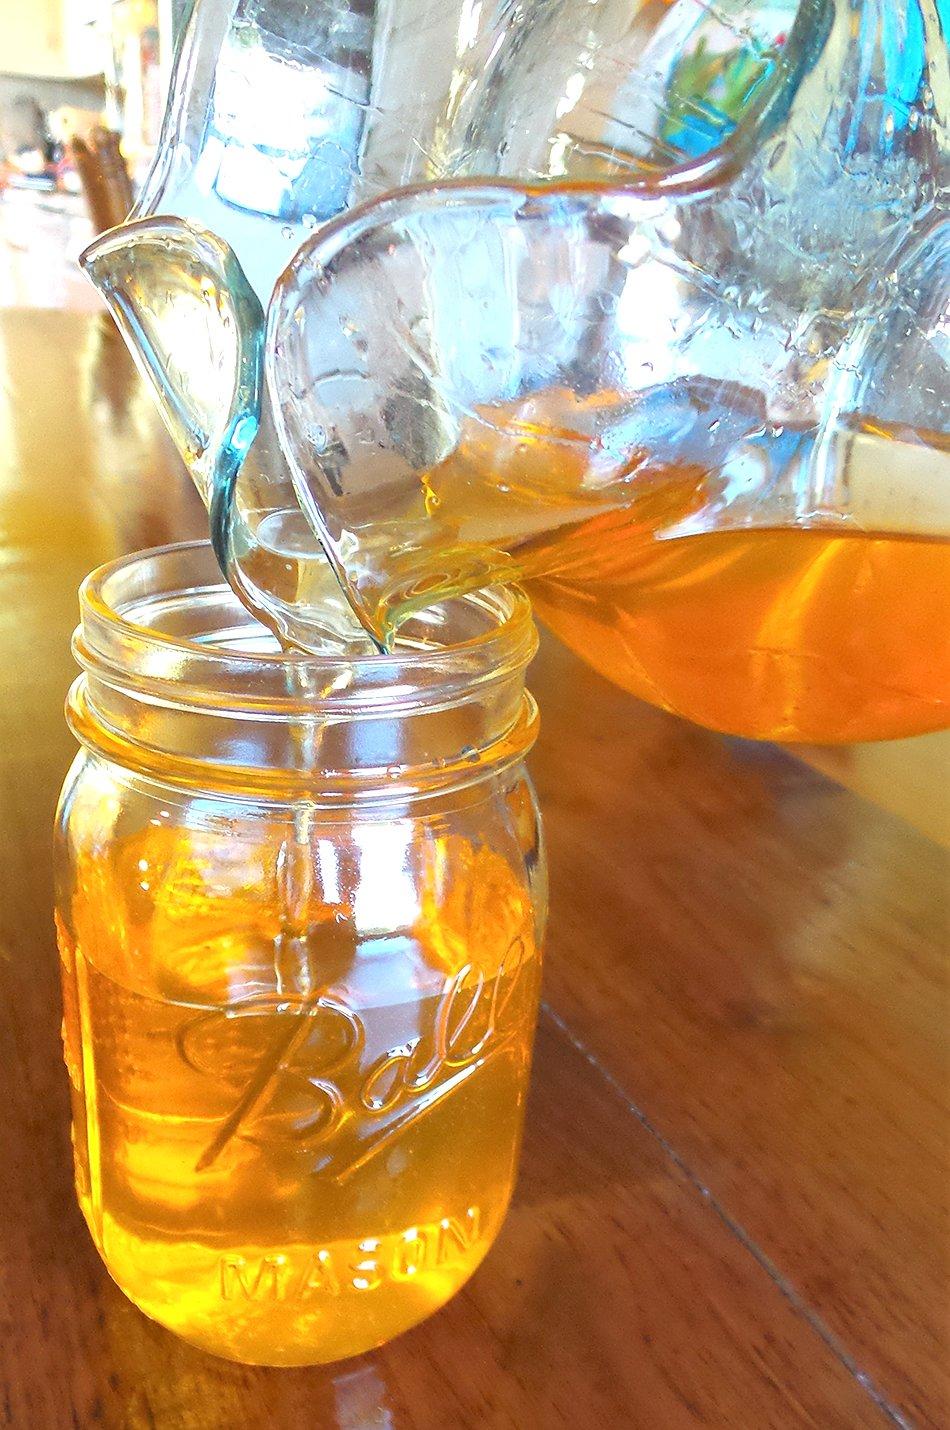 Filtering the warm fat into a pitcher makes filling the jars easy.